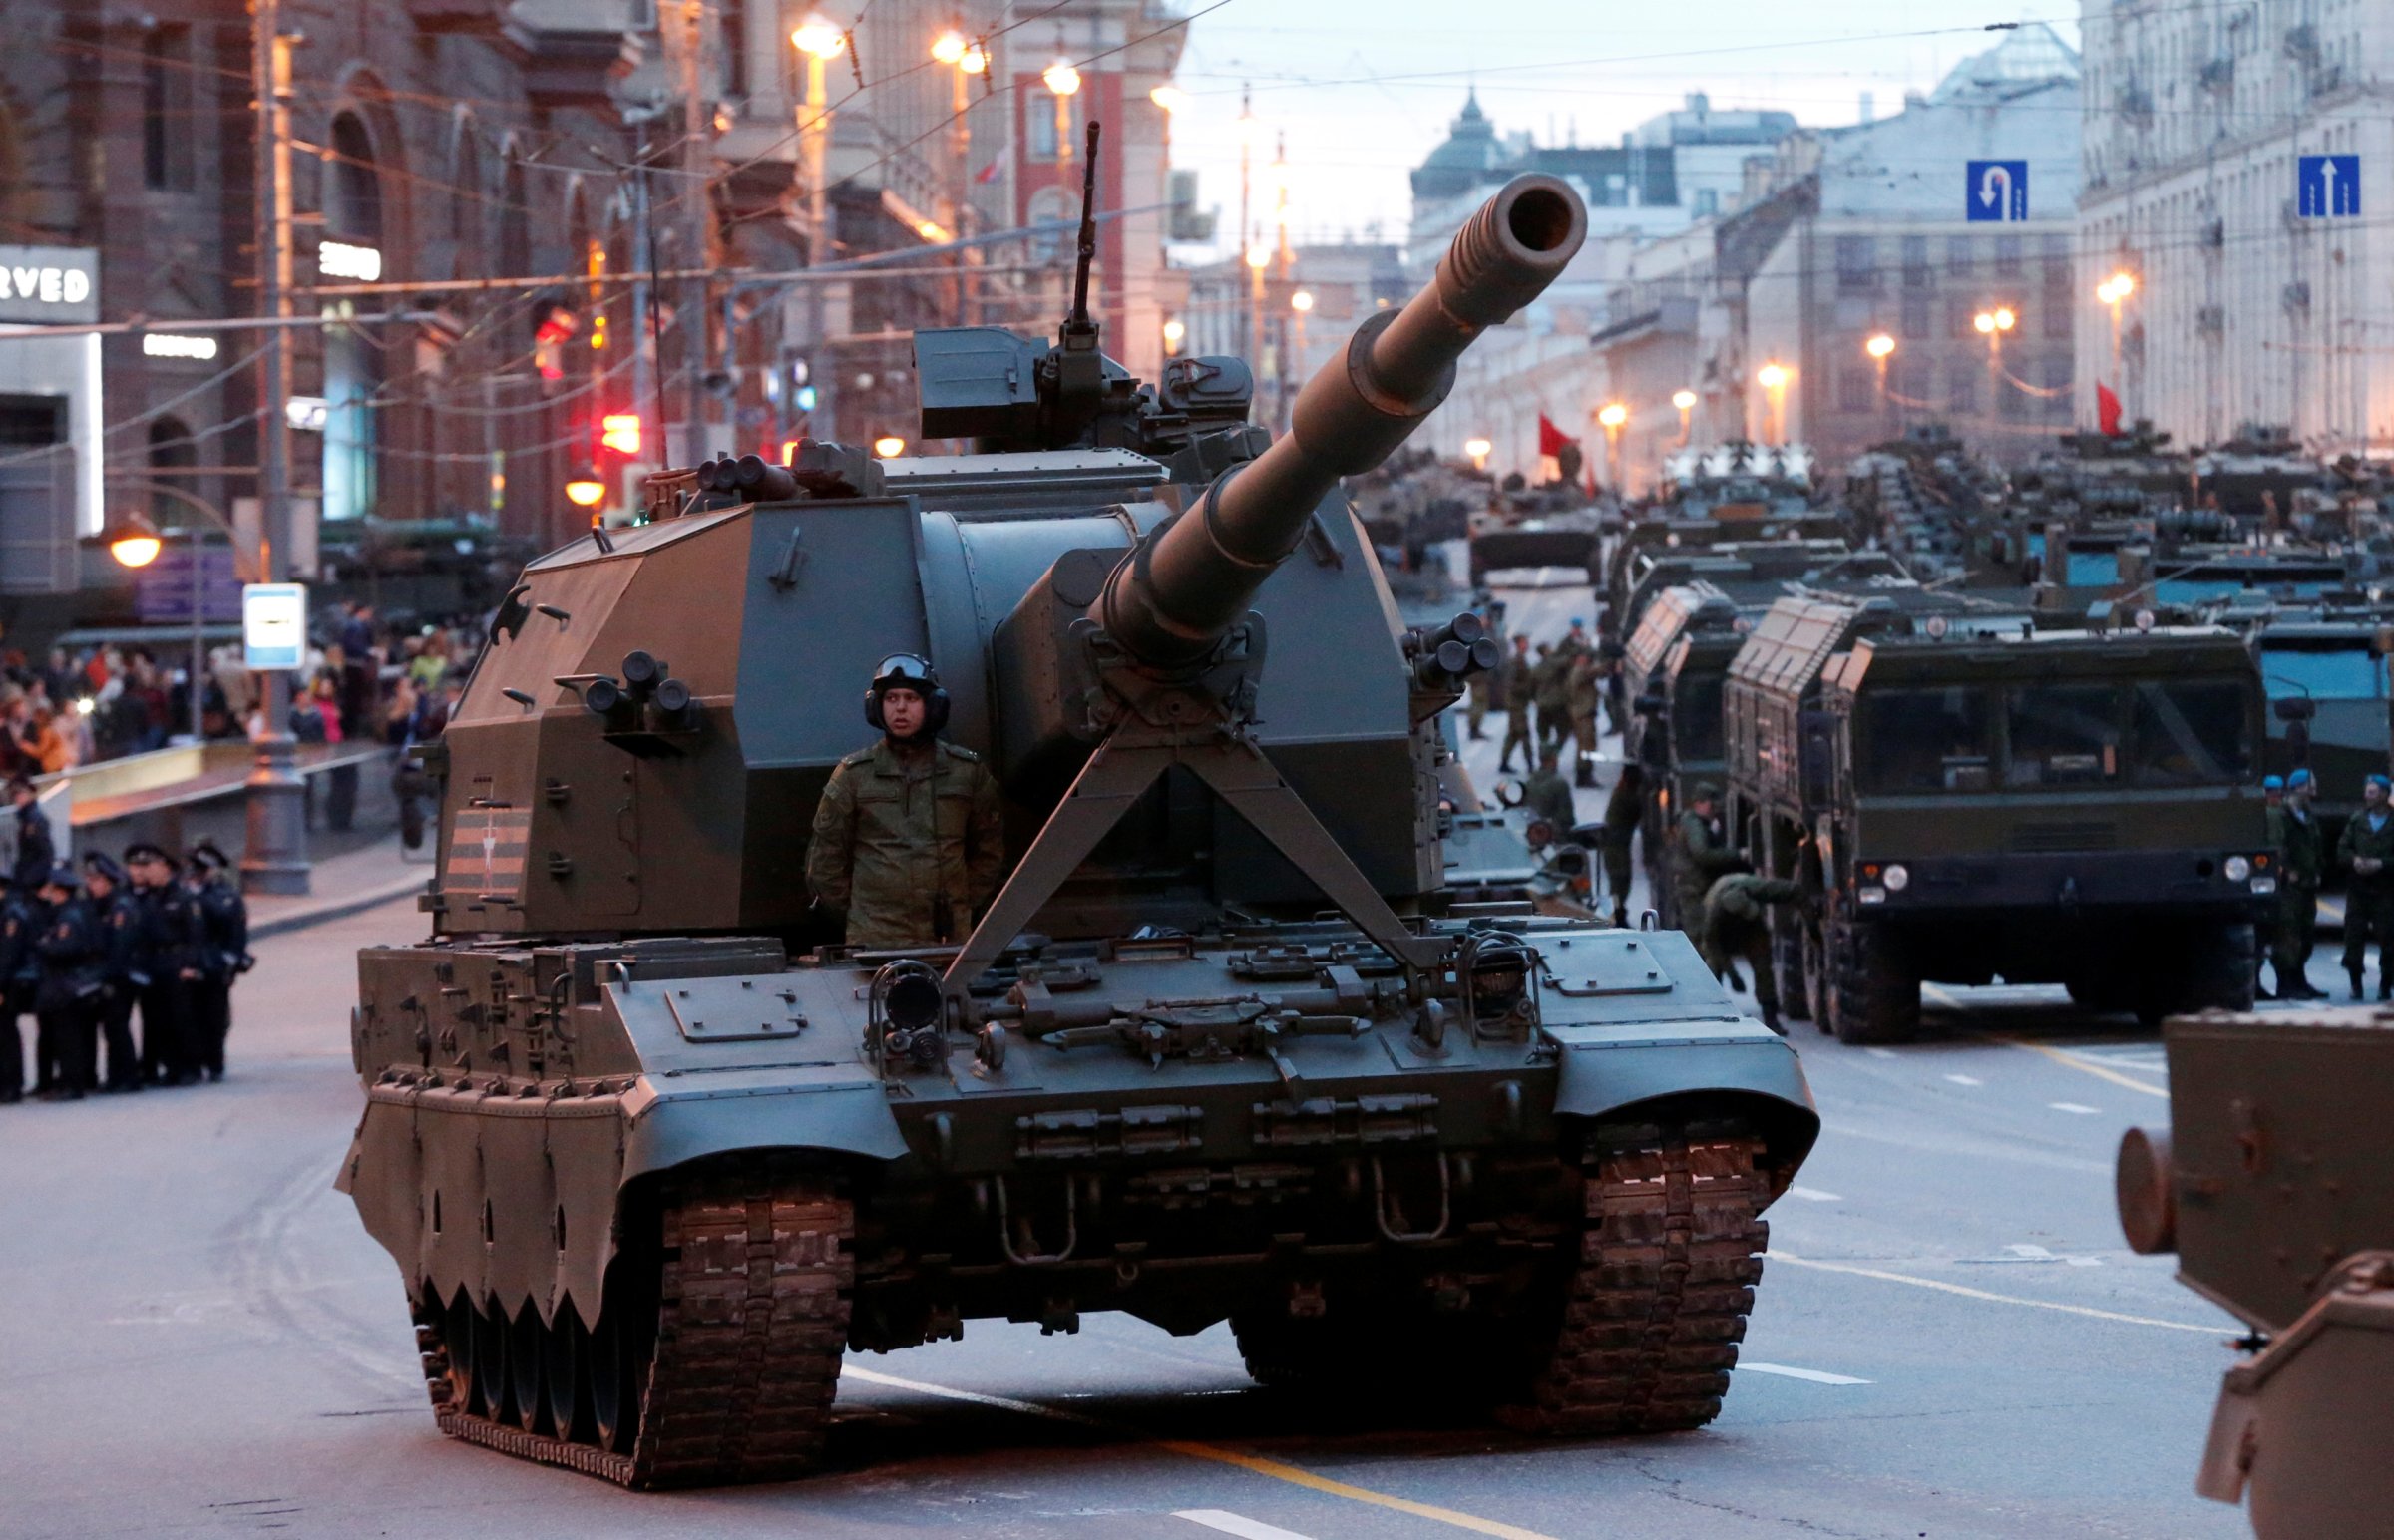 Russian military vehicles are parked in Tverskaya street before moving towards Red Square for a rehearsal for the Victory Day parade in central Moscow